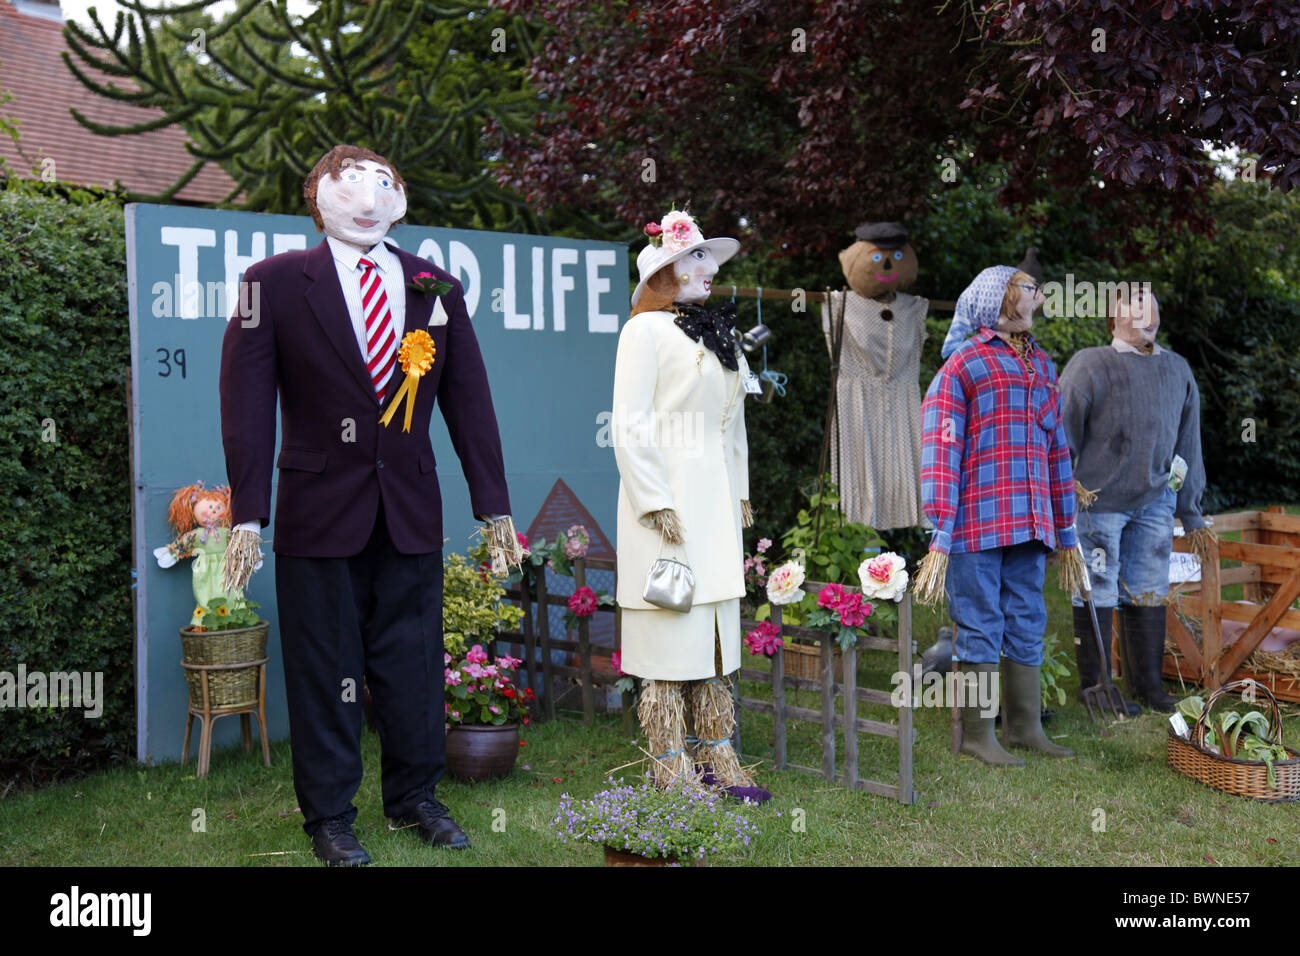 THE GOOD LIFE SCARECROWS MUSTON NORTH YORKSHIRE MUSTON NORTH YORKSHIRE MUSTON NORTH YORKSHIRE 27 July 2010 Stock Photo